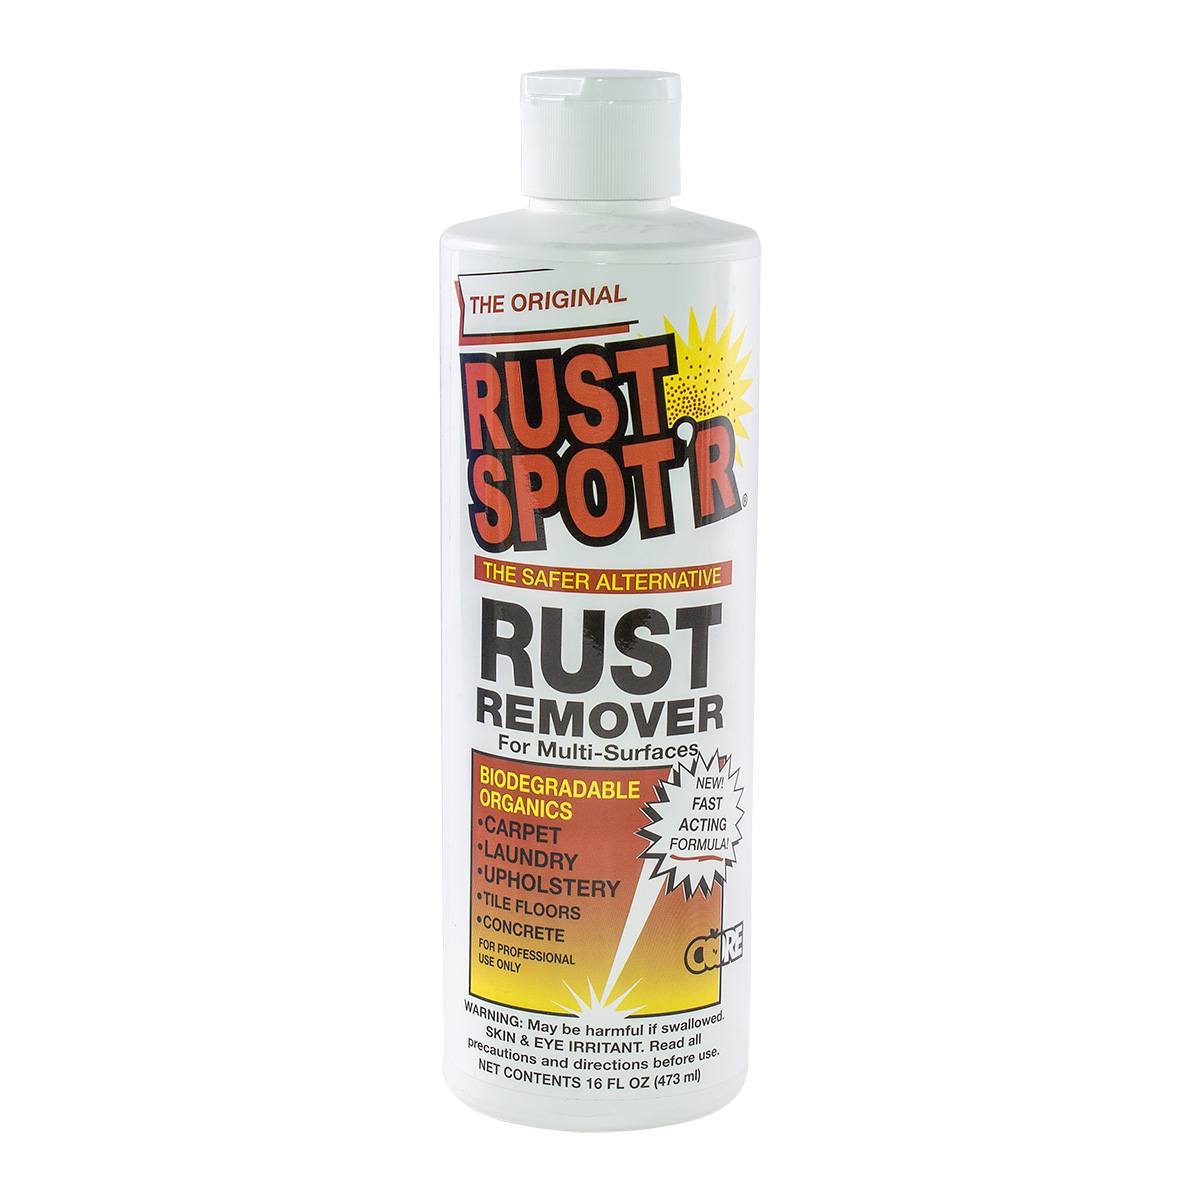 1 Pint Spray Bottle Rust Eater and Lubricant